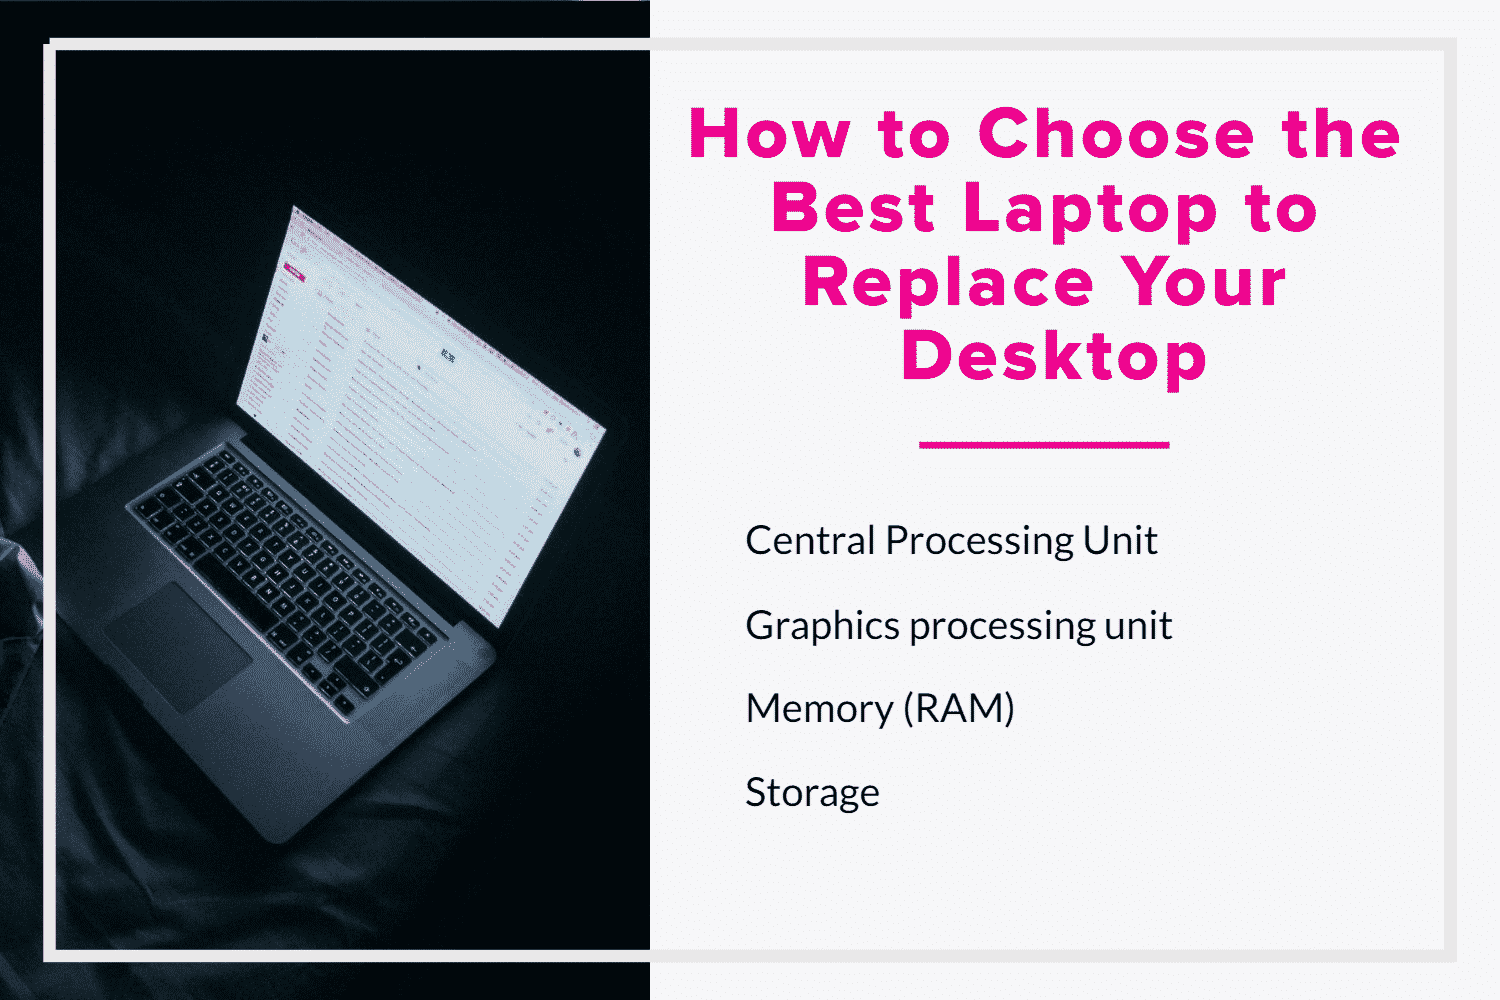 How to Choose the Best Laptop to Replace Your Desktop